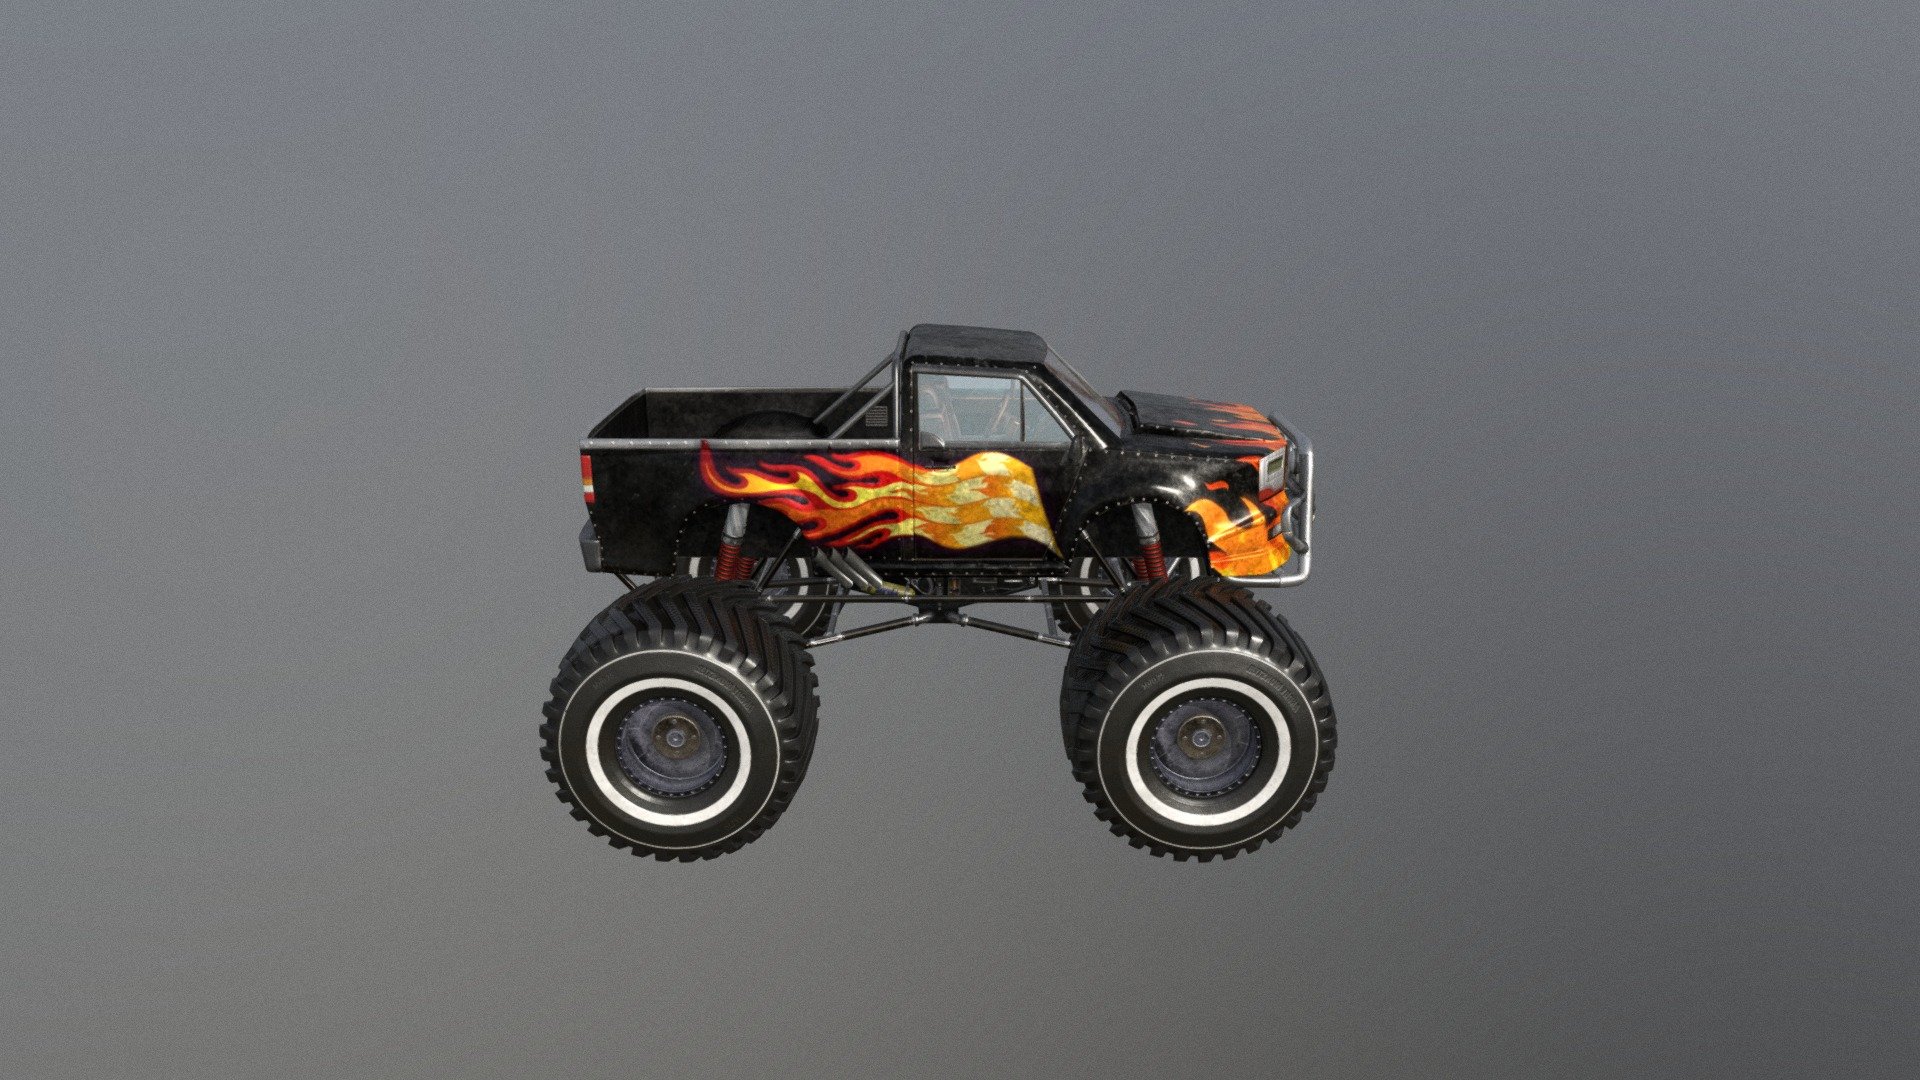 Monster Truck car, full rig, game ready model.
You can find all my model to the link below - Monster Truck - 3D model by naughtymonk 3d model